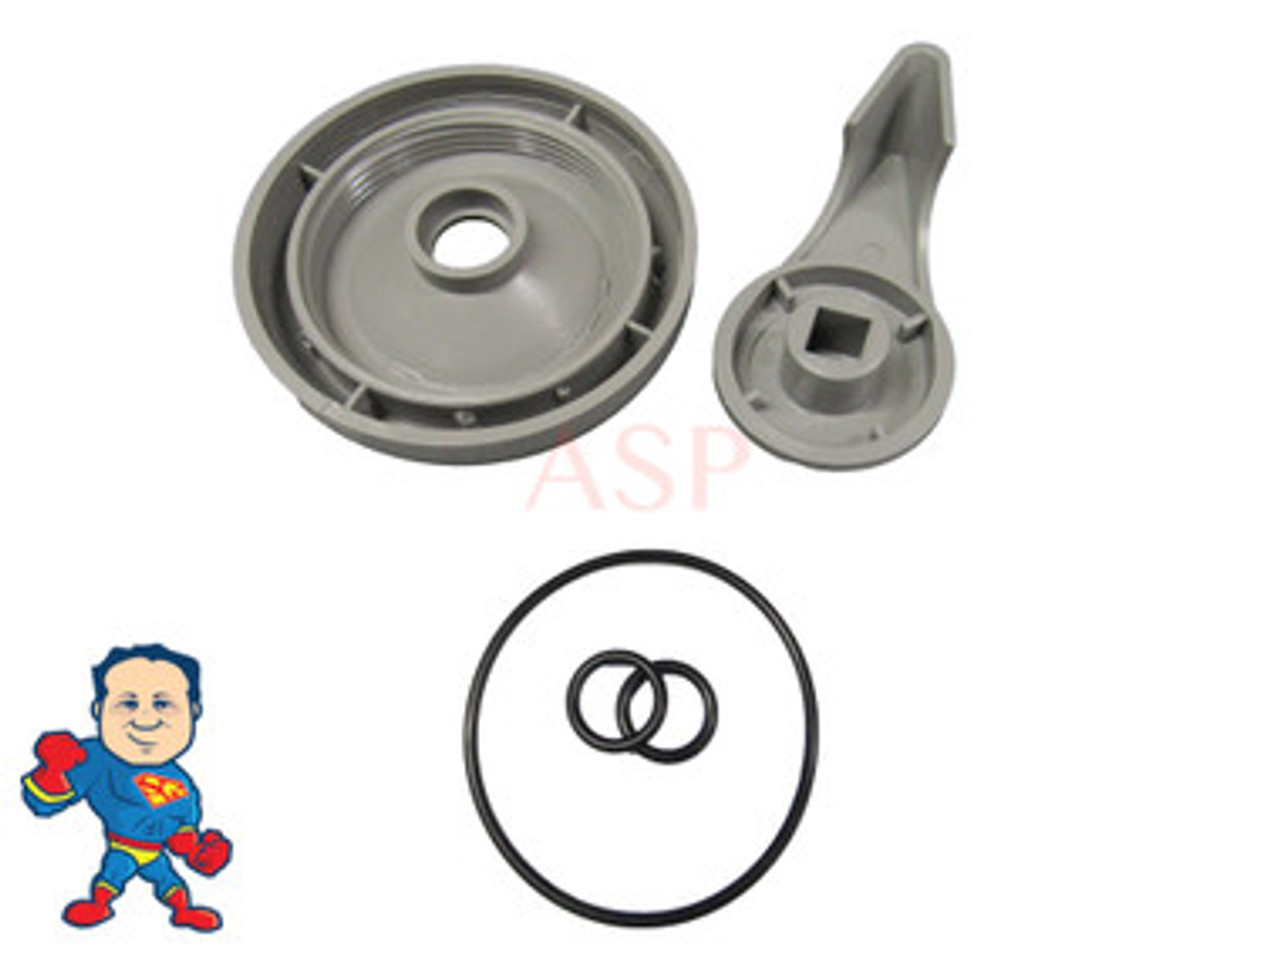 Diverter Valve Spa Gray Hot Tub O-Rings Textured Cap Kit Reinforced Handle How To Video